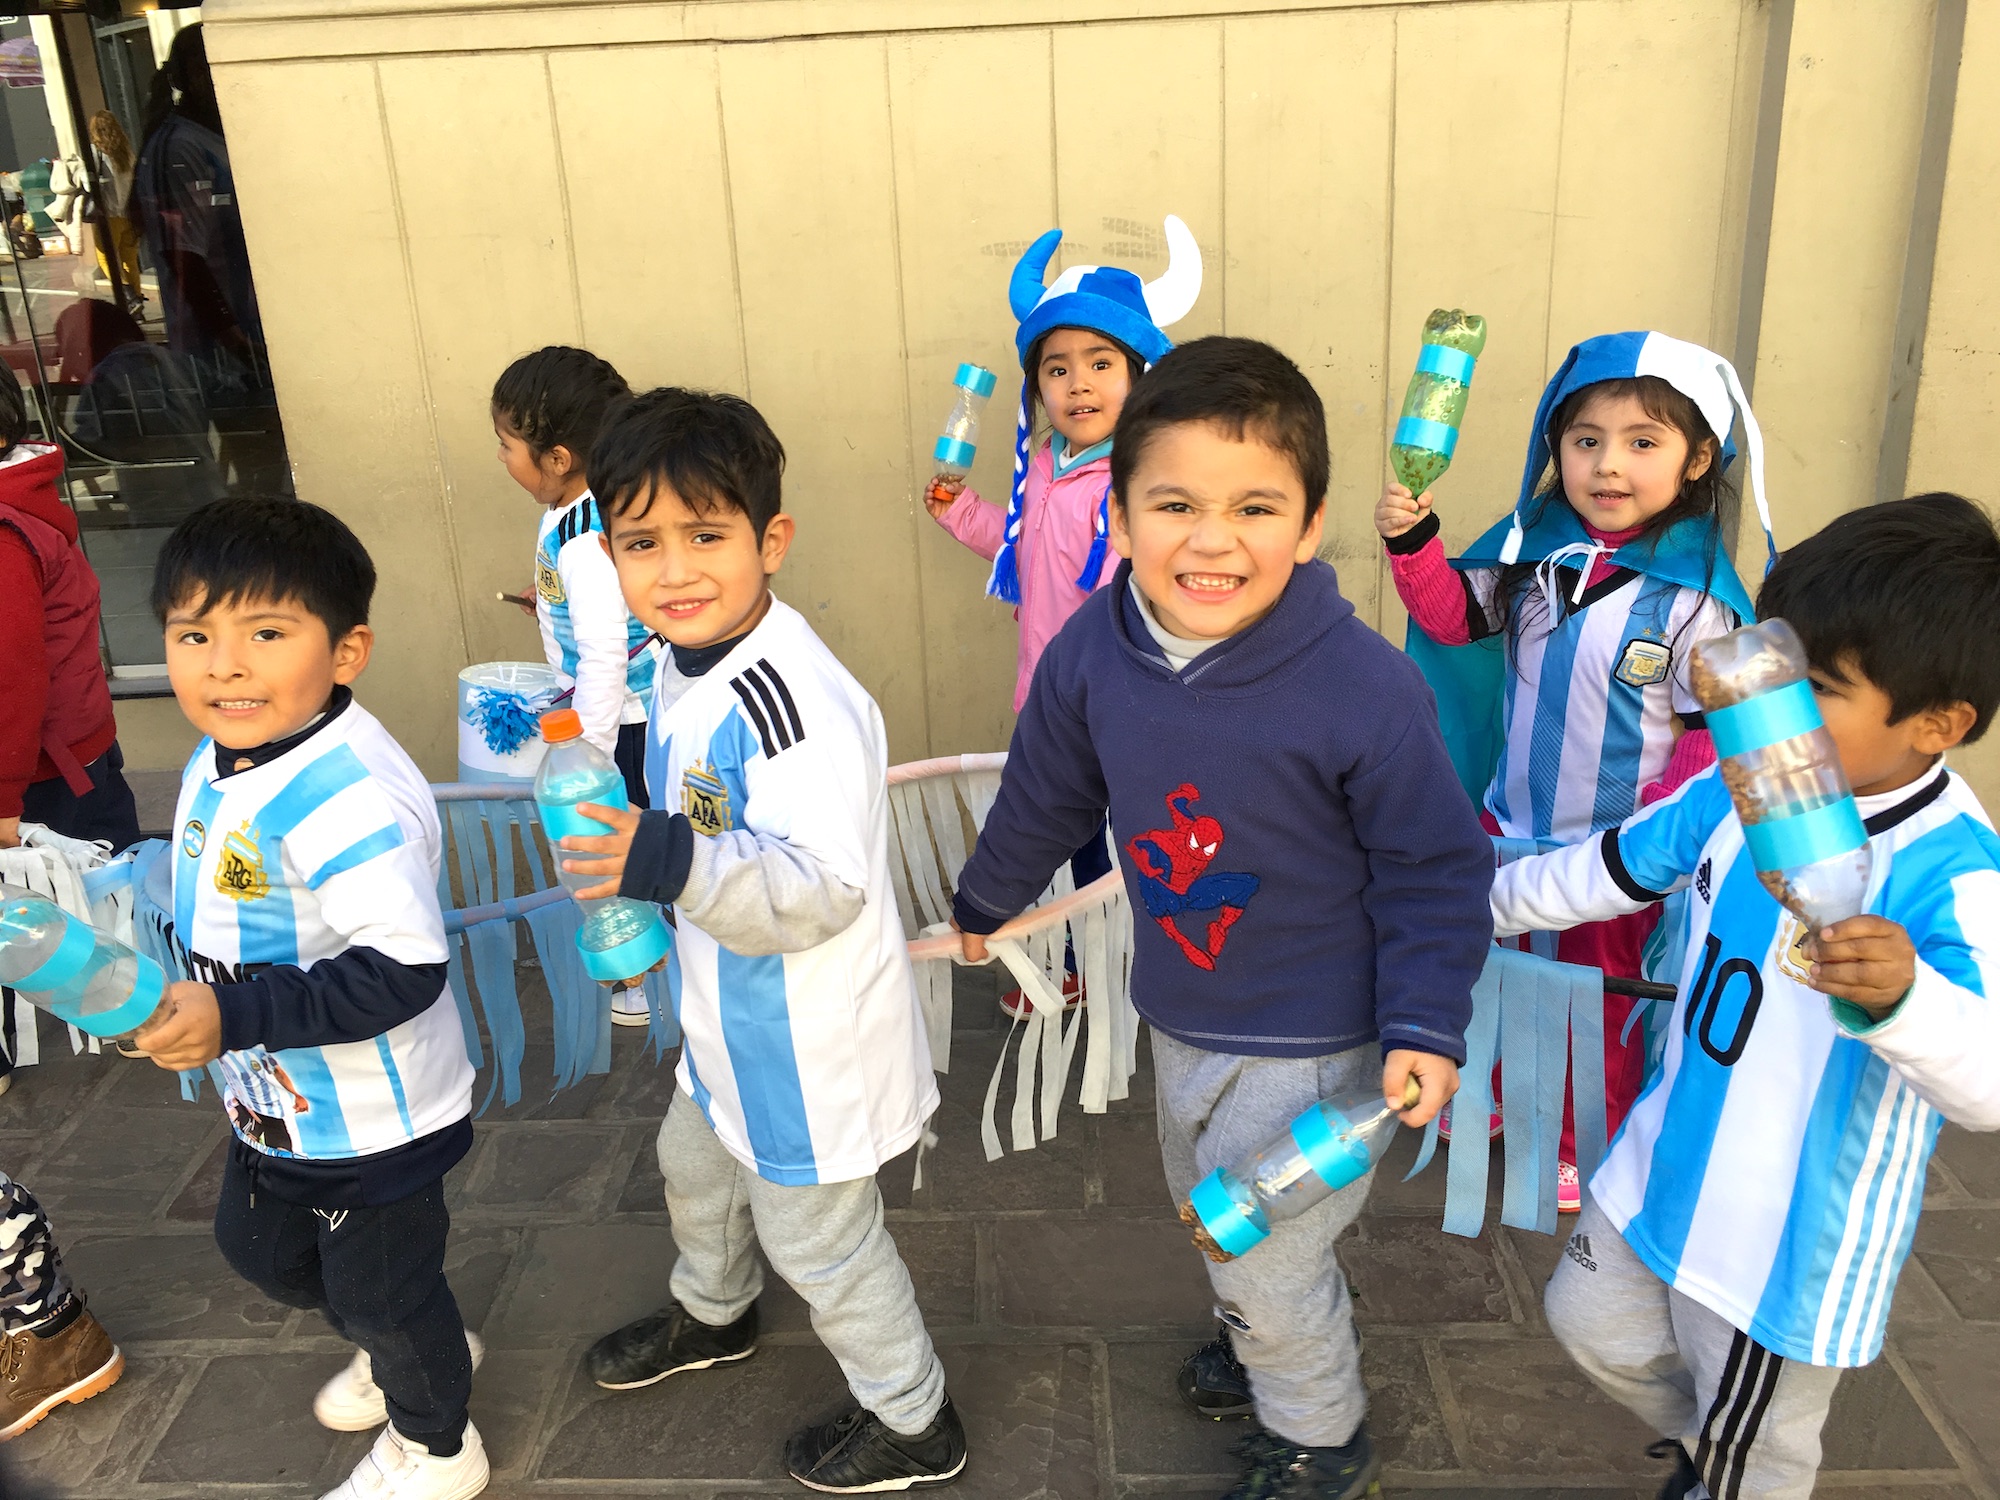 Argentinian children ready for the World Cup 2018, Santiago de Jujuy